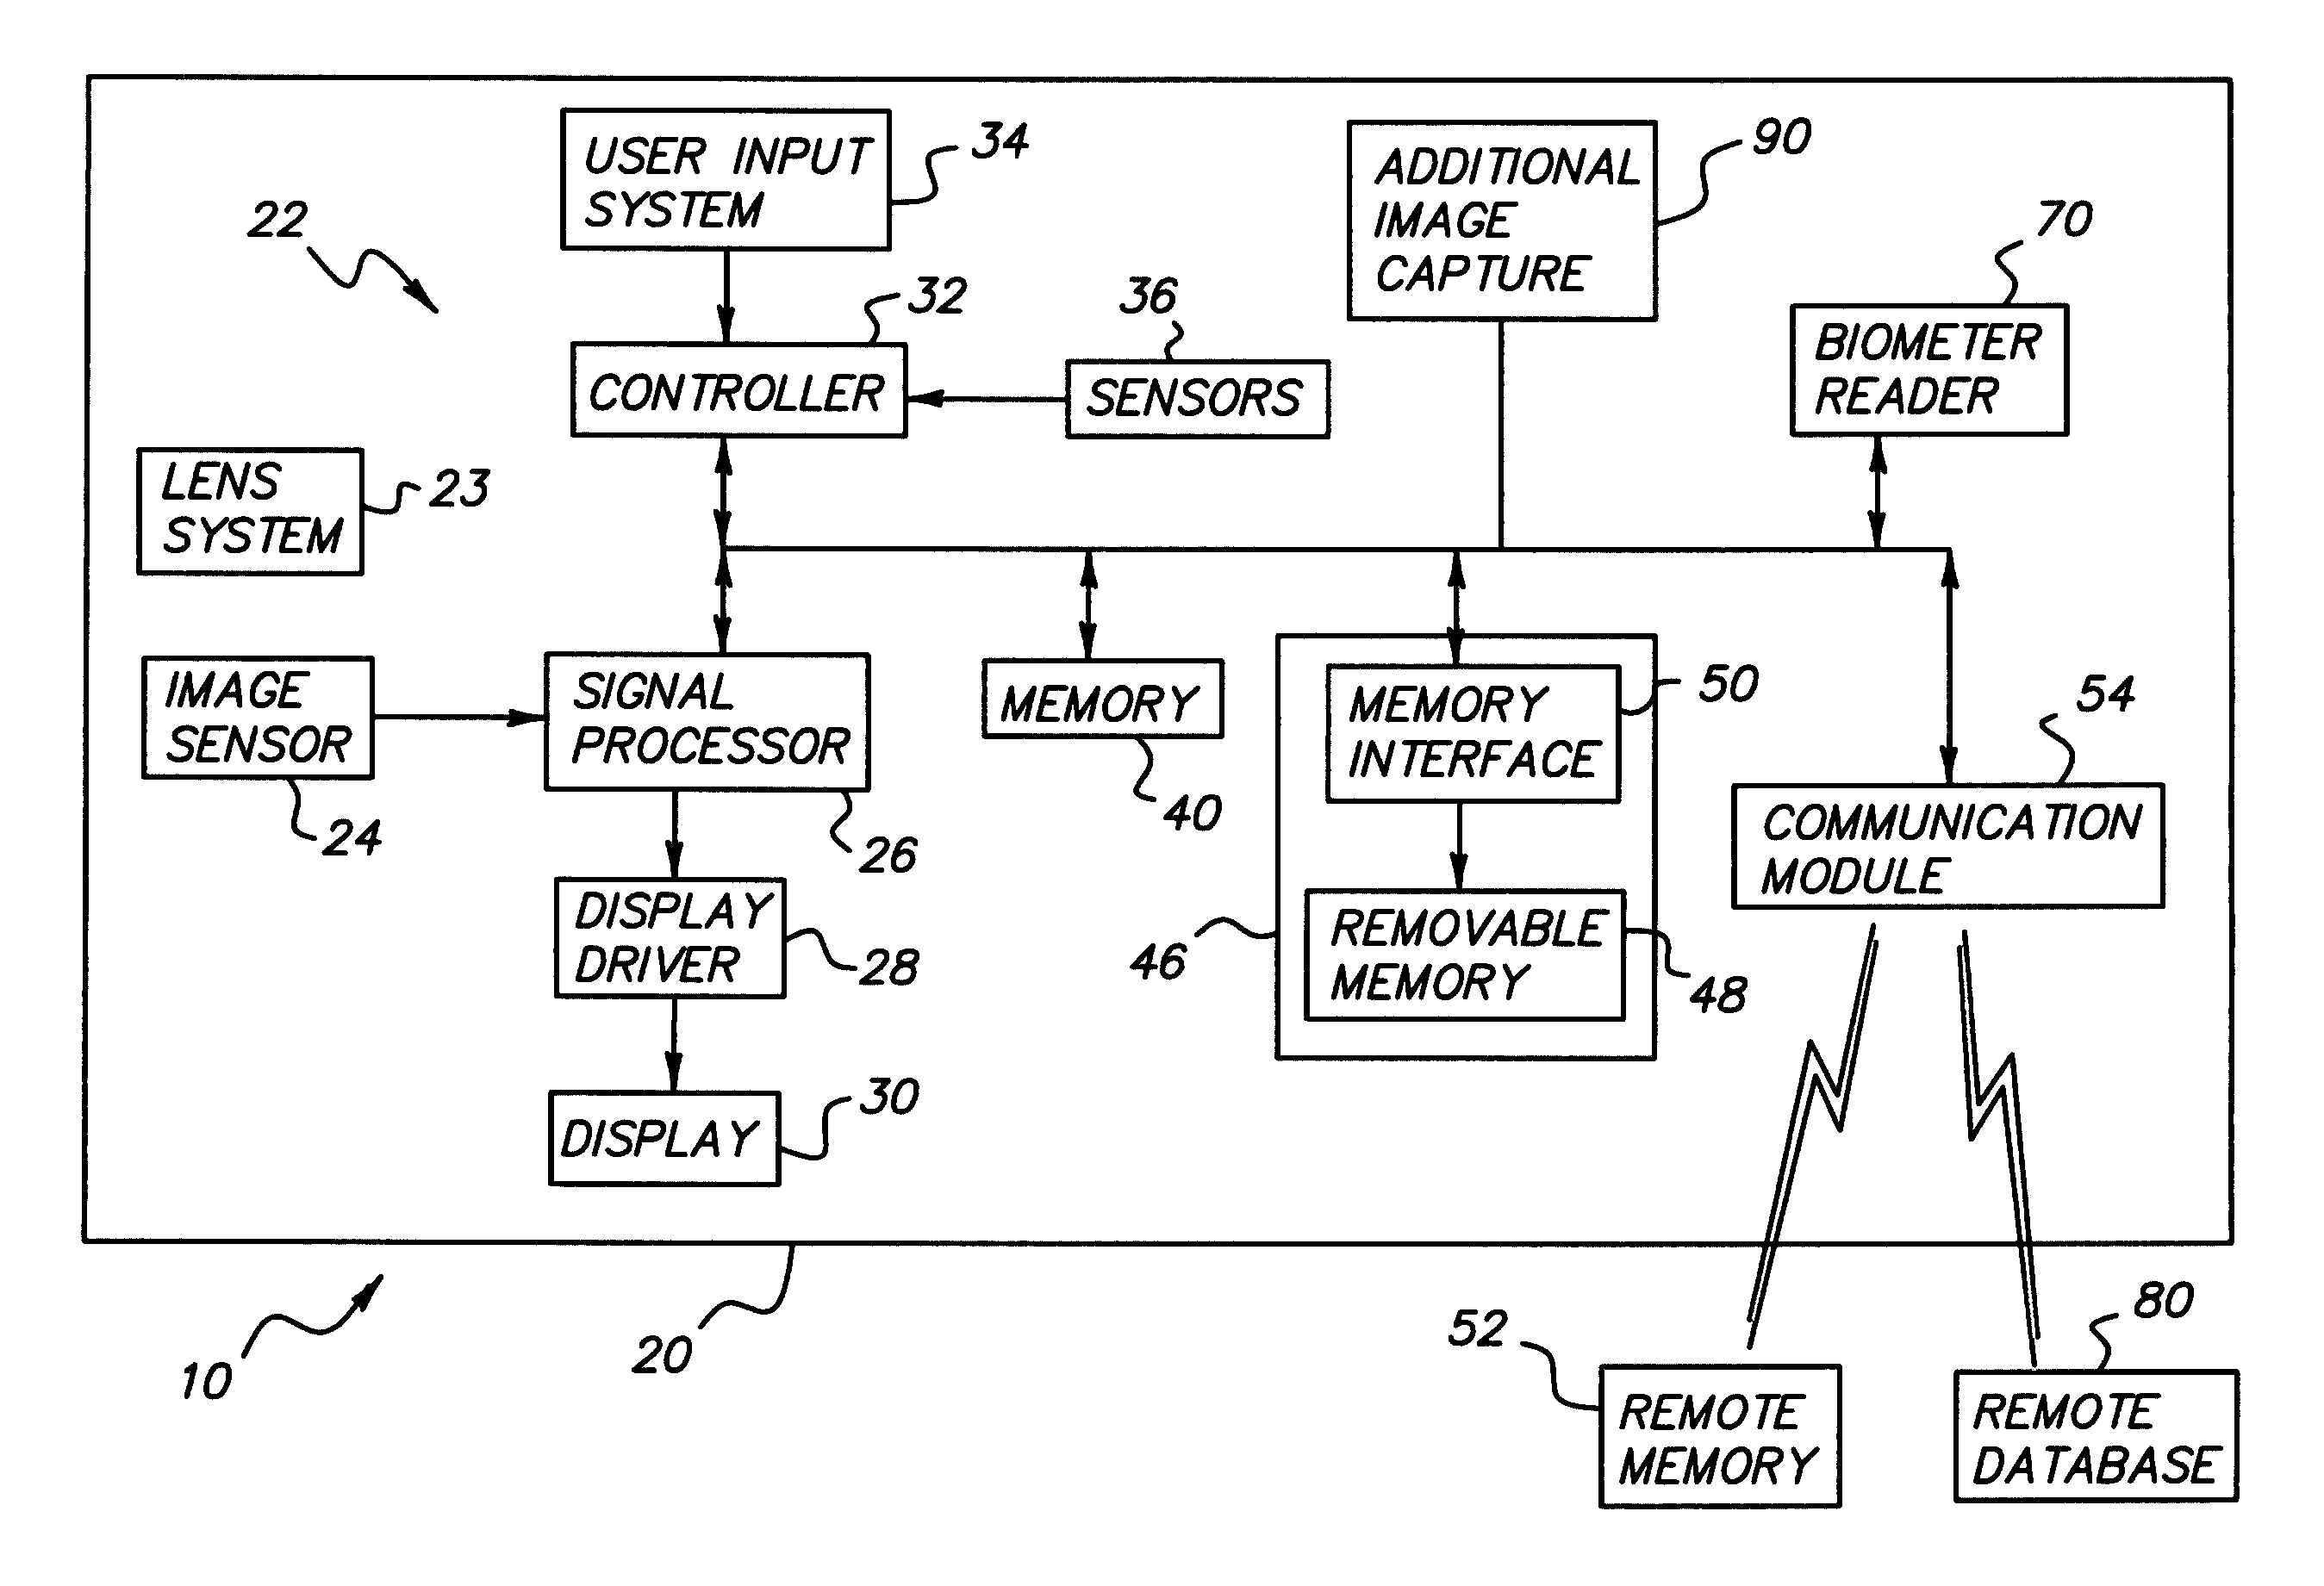 Wireless digital image capture device with biometric readers